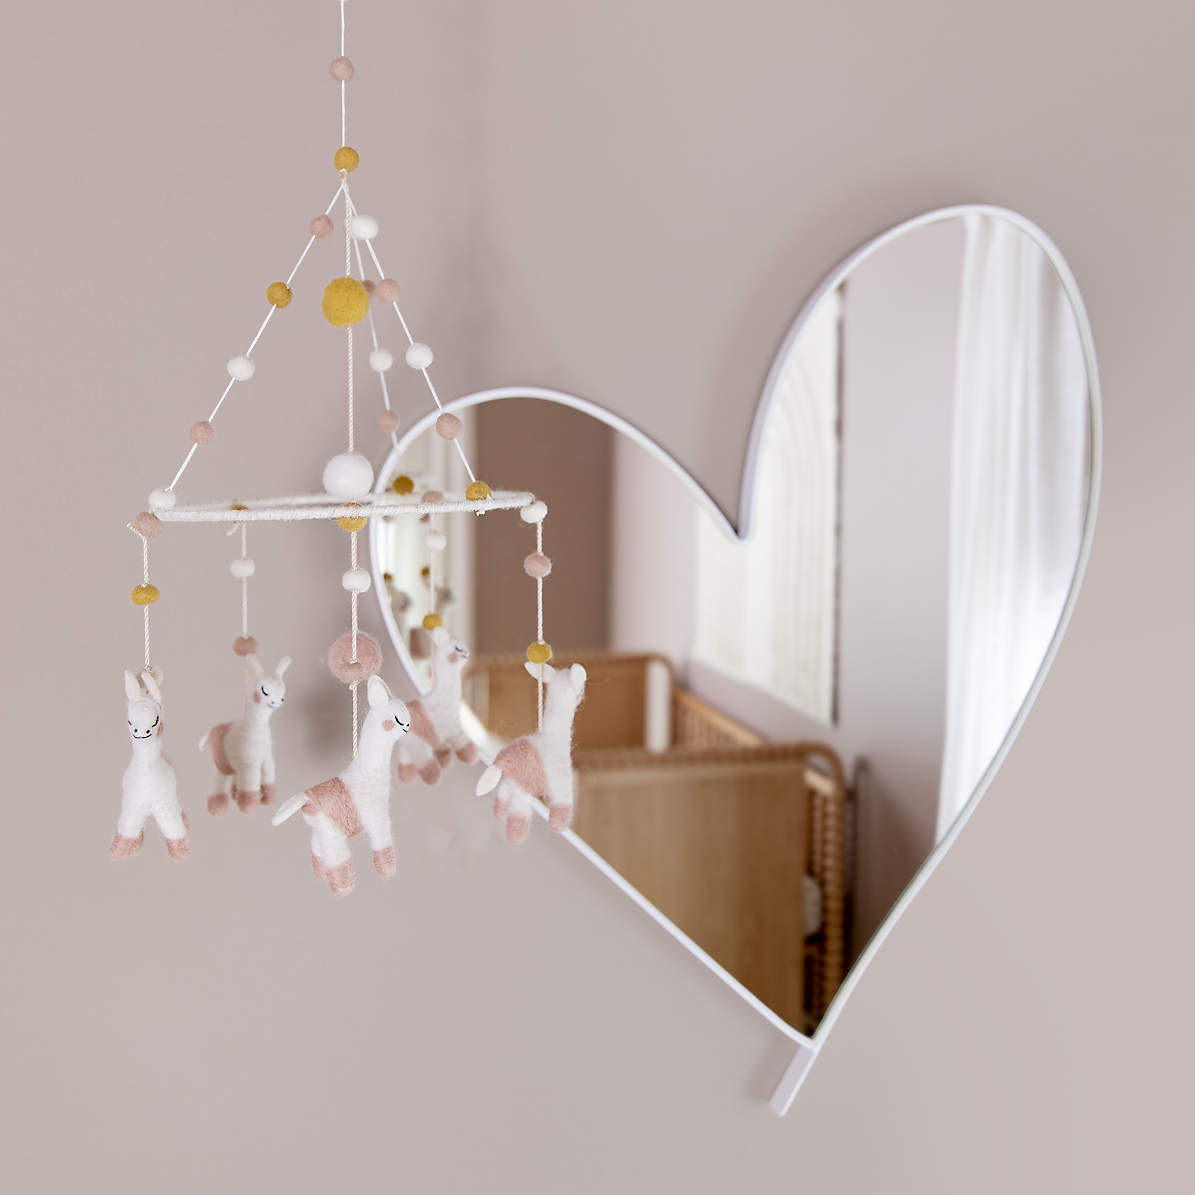 Large Heart Brass Metal Wall Mirror by Leanne Ford + Reviews